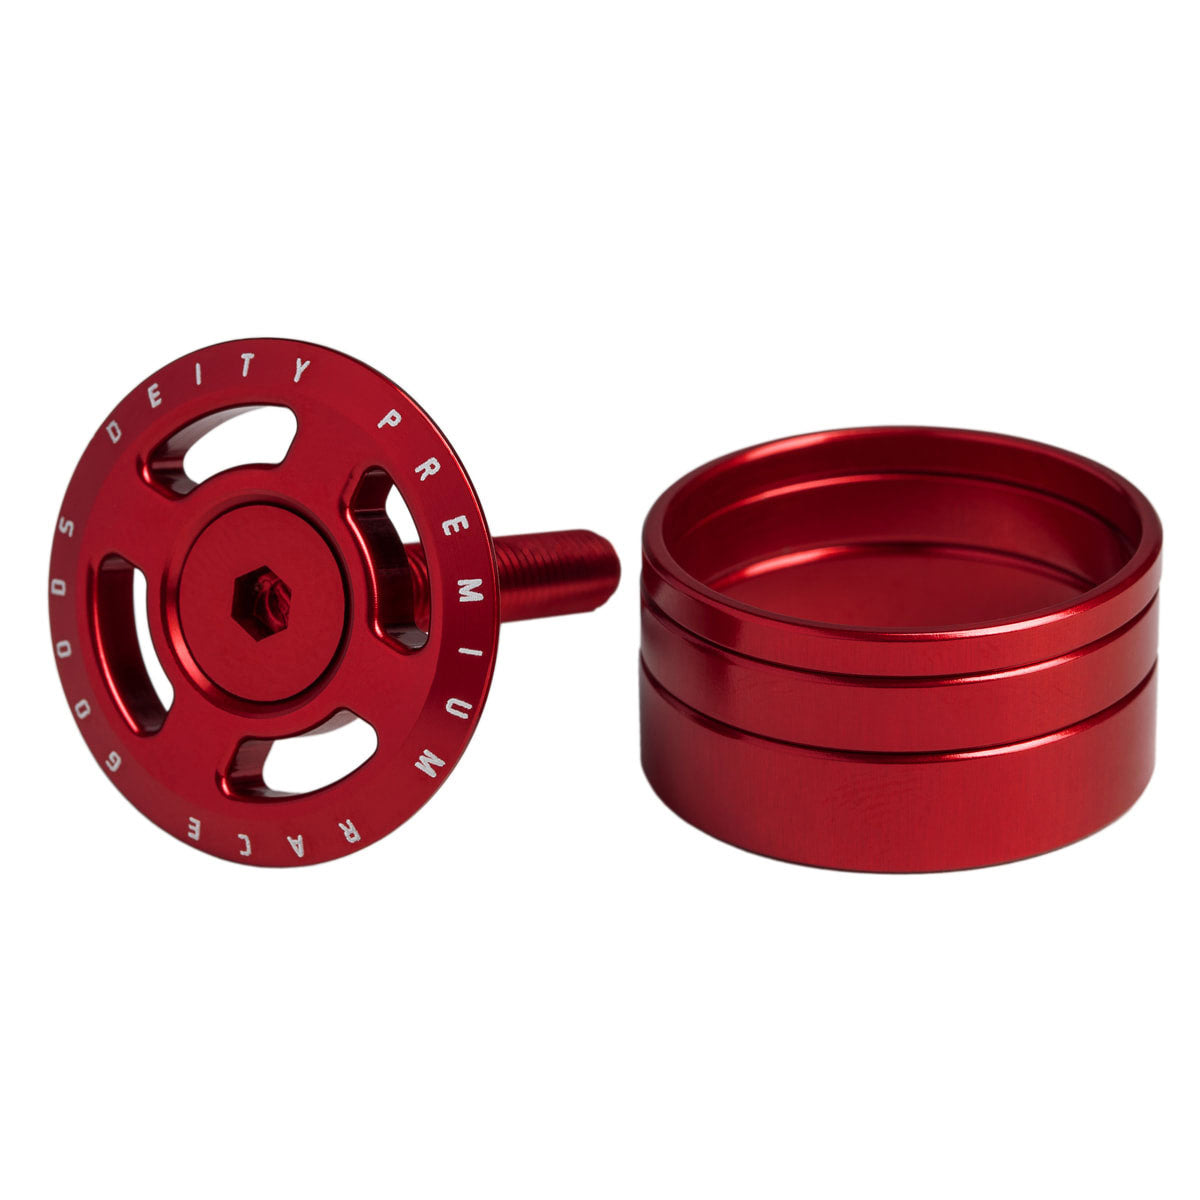 Deity Crosshair Headset Spacer and Top Cap Kit - Red